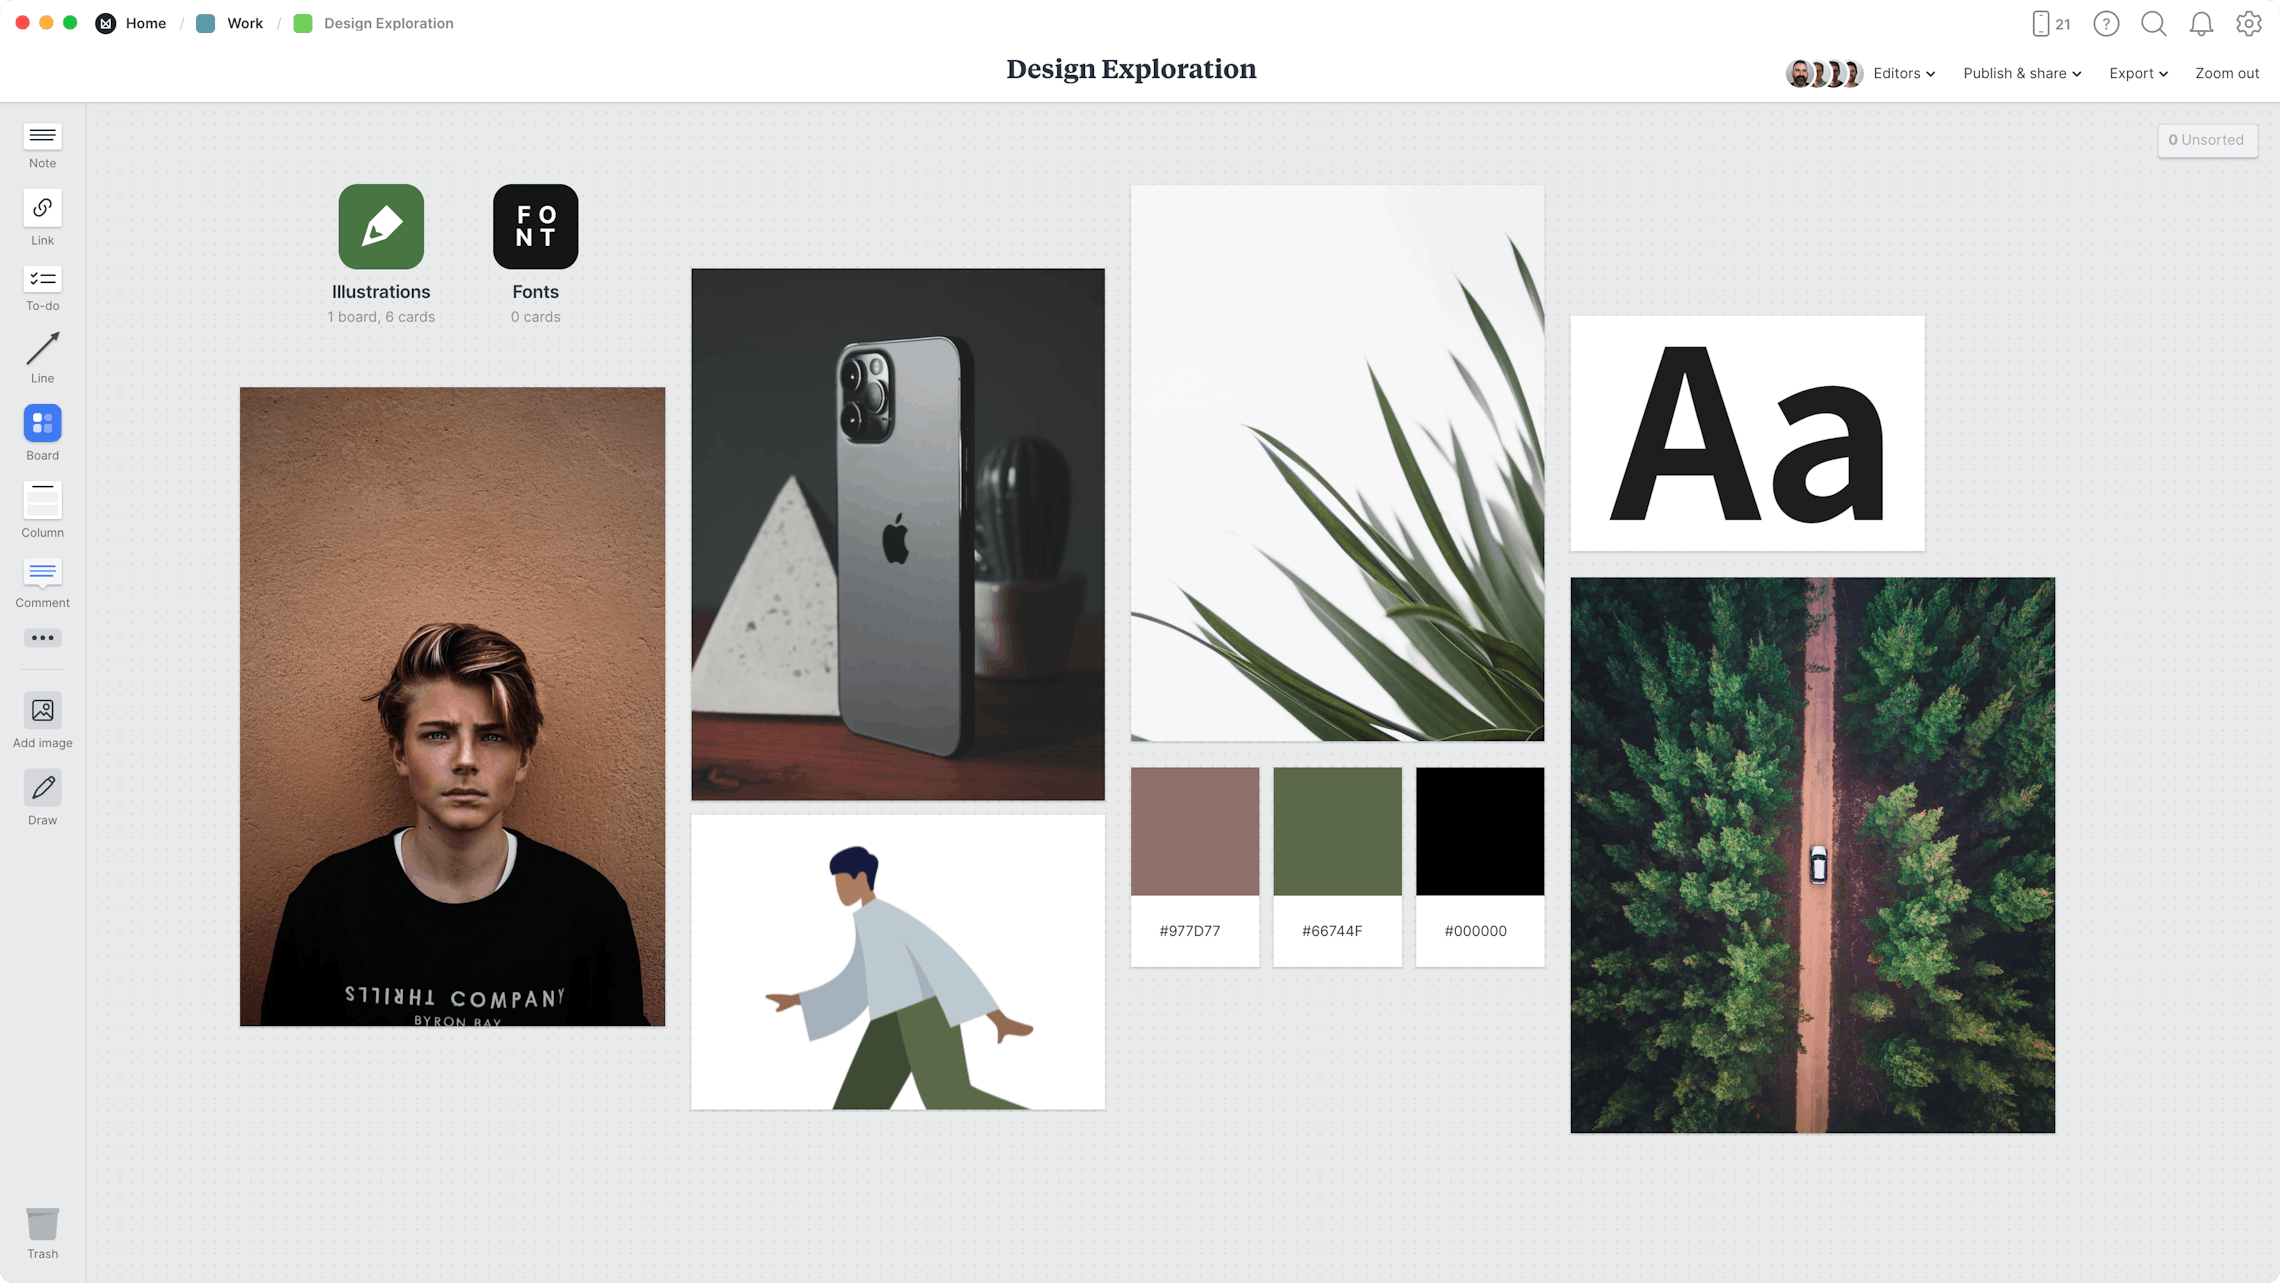 Design Exploration Template, within the Milanote app